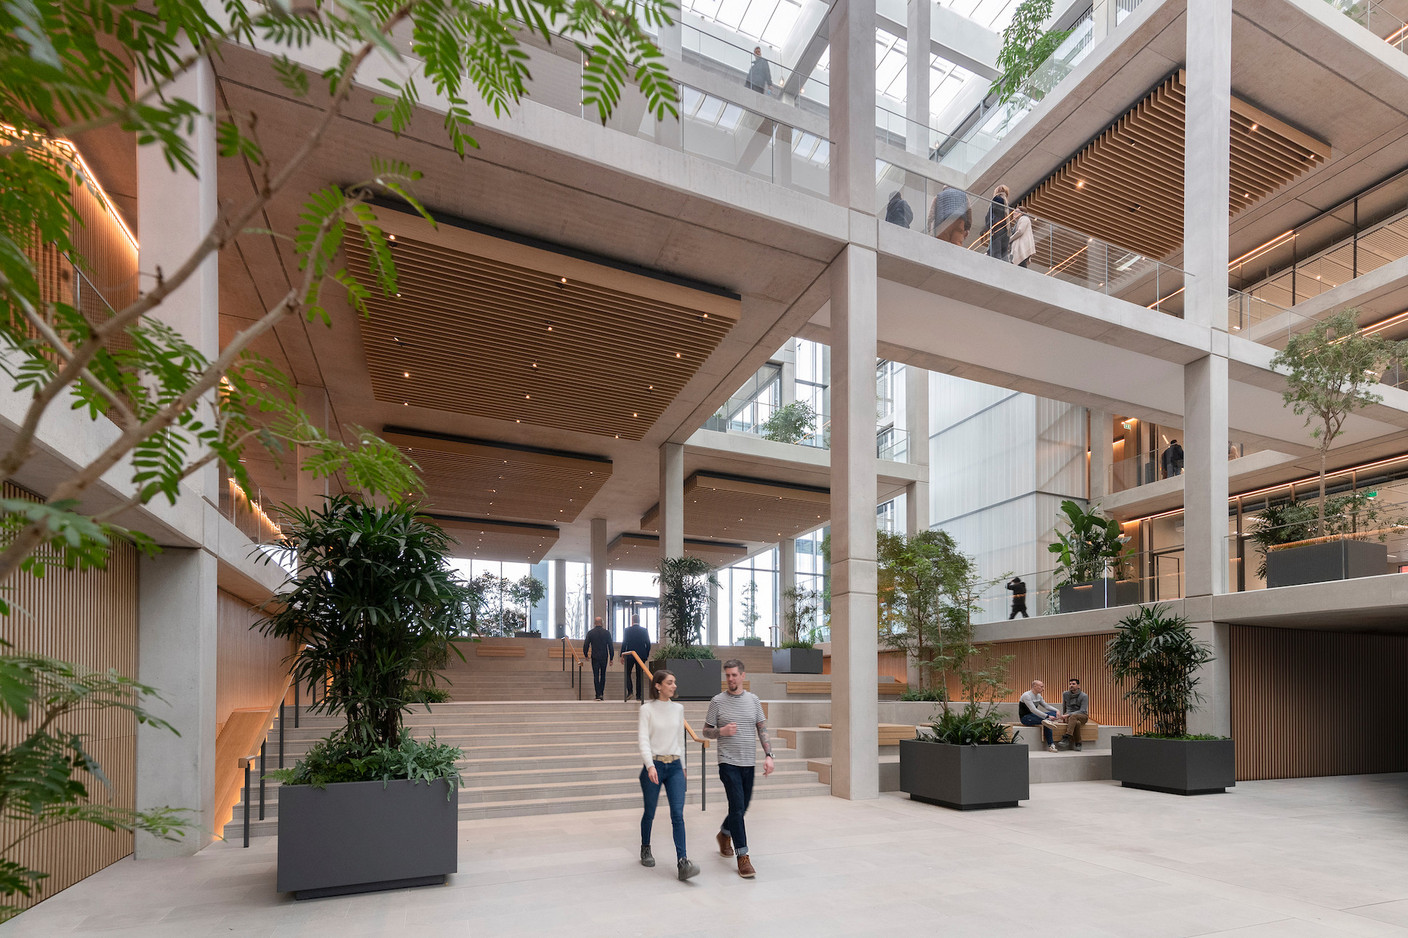 On the ground floor of the atrium, the staircases absorb the difference in level between the Place de France and the Place de l’Académie. Nigel Young/Foster + Partners